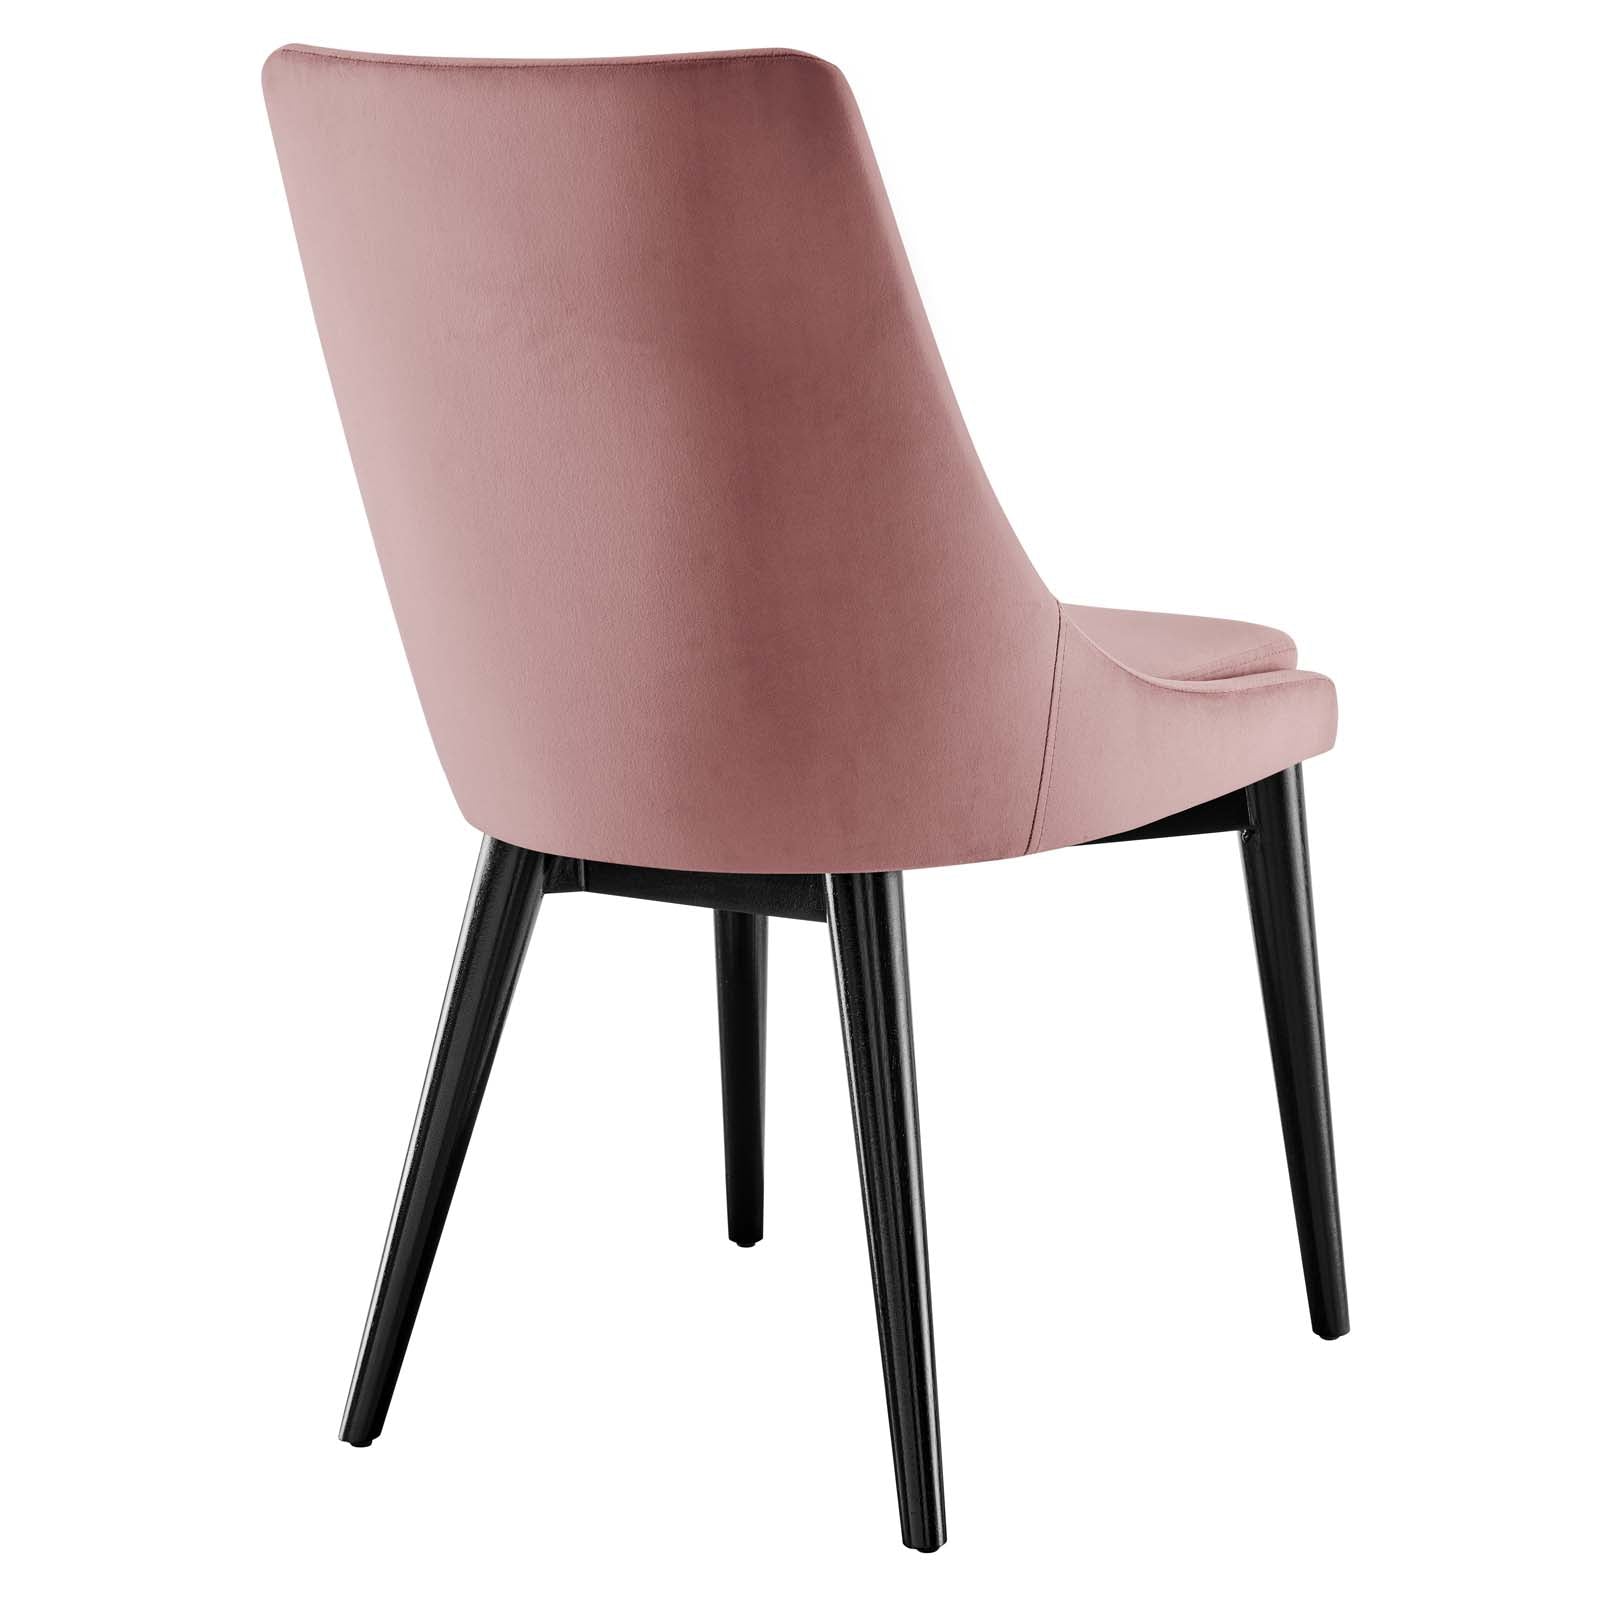 Modway Dining Chairs - Viscount Accent Performance Velvet Dining Chairs Set Of 2 Dusty Rose